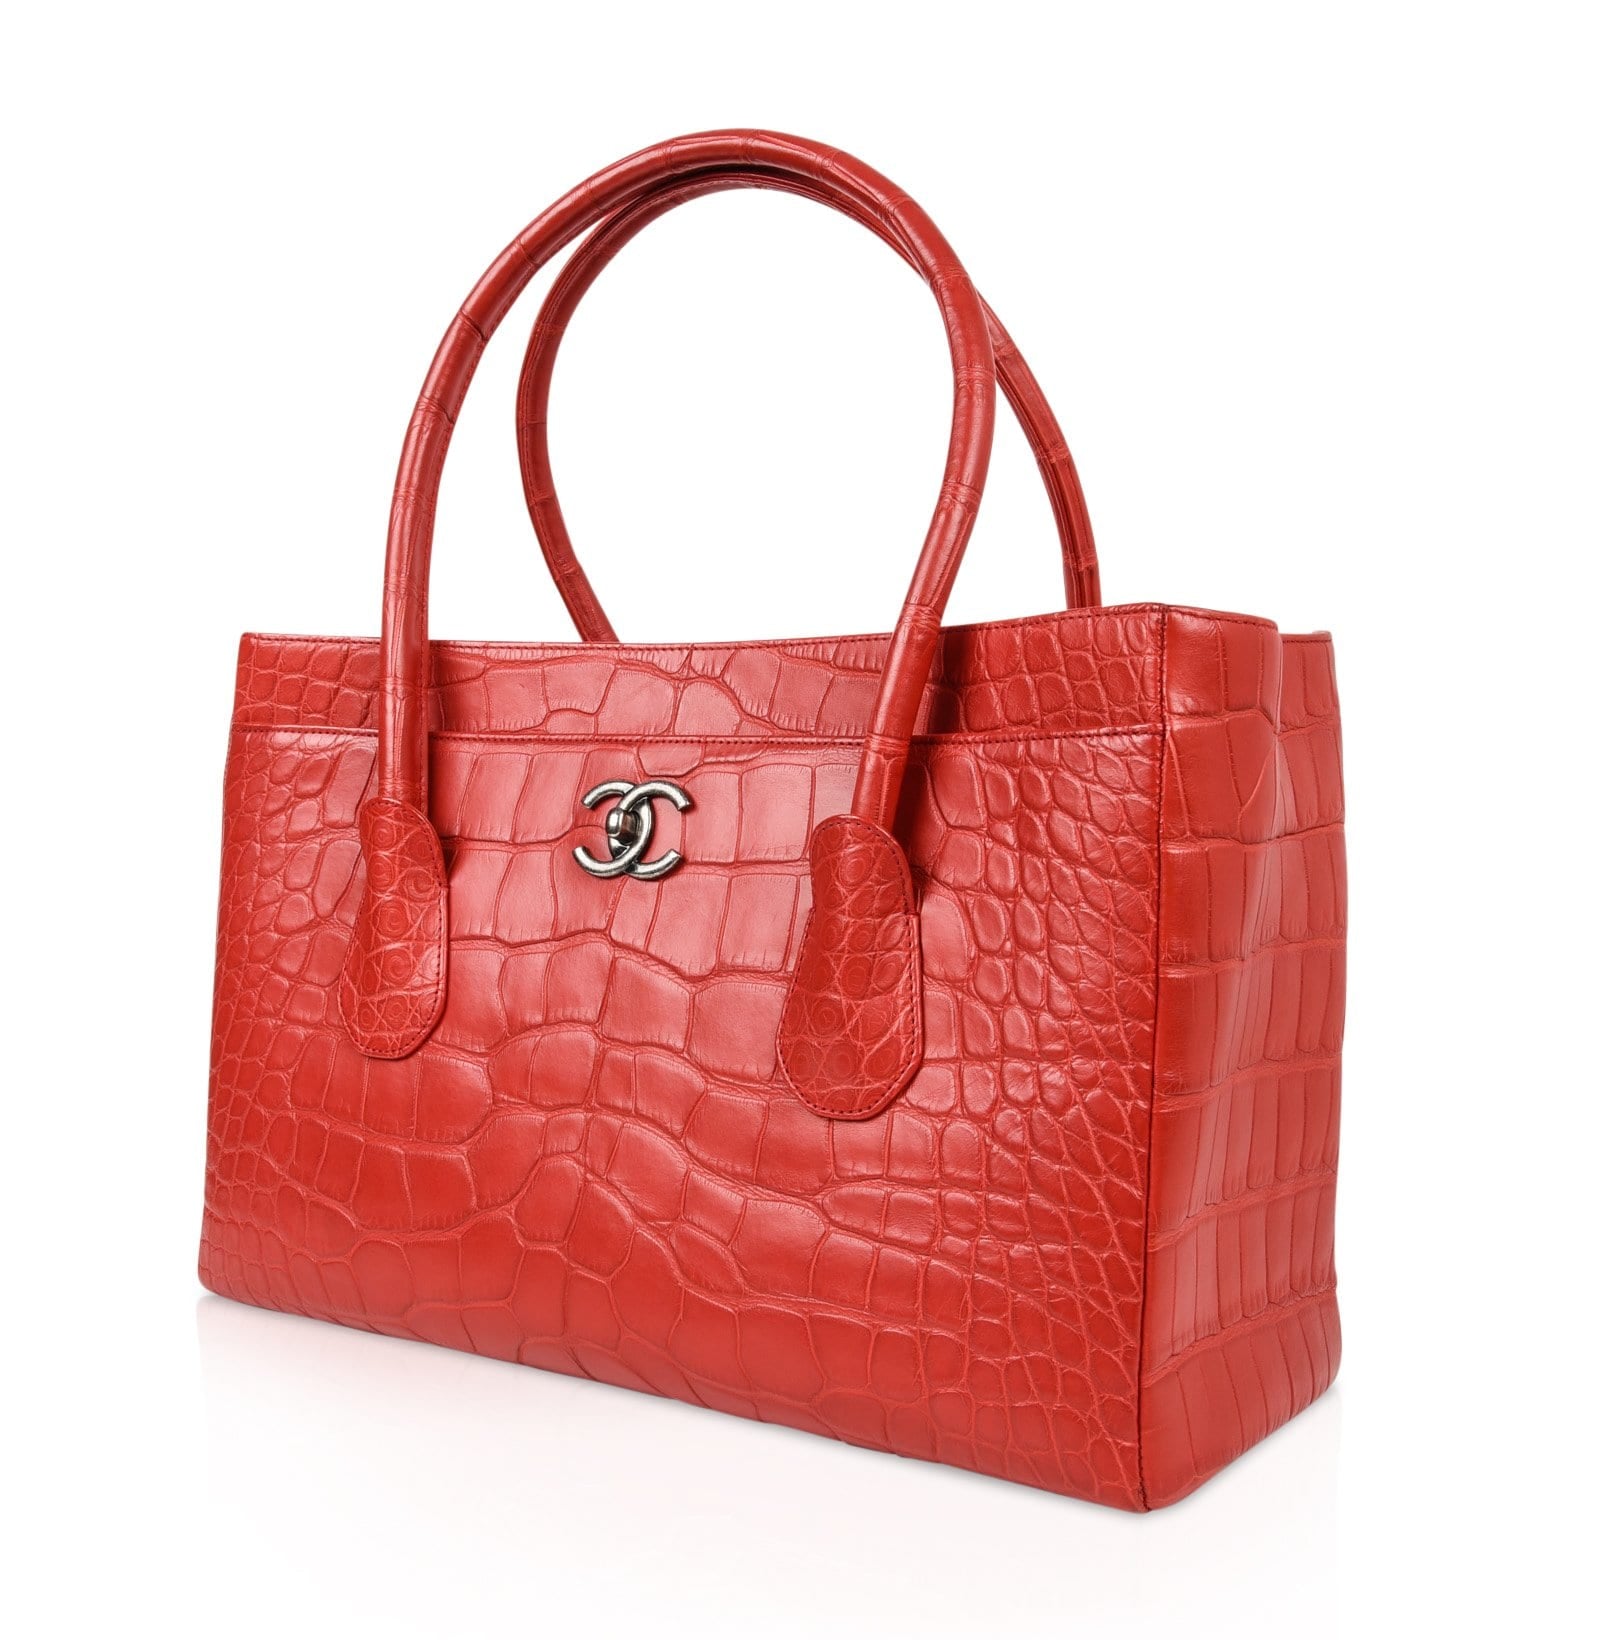 Chanel Large CC Travel Tote: Rare Red and Tan Color